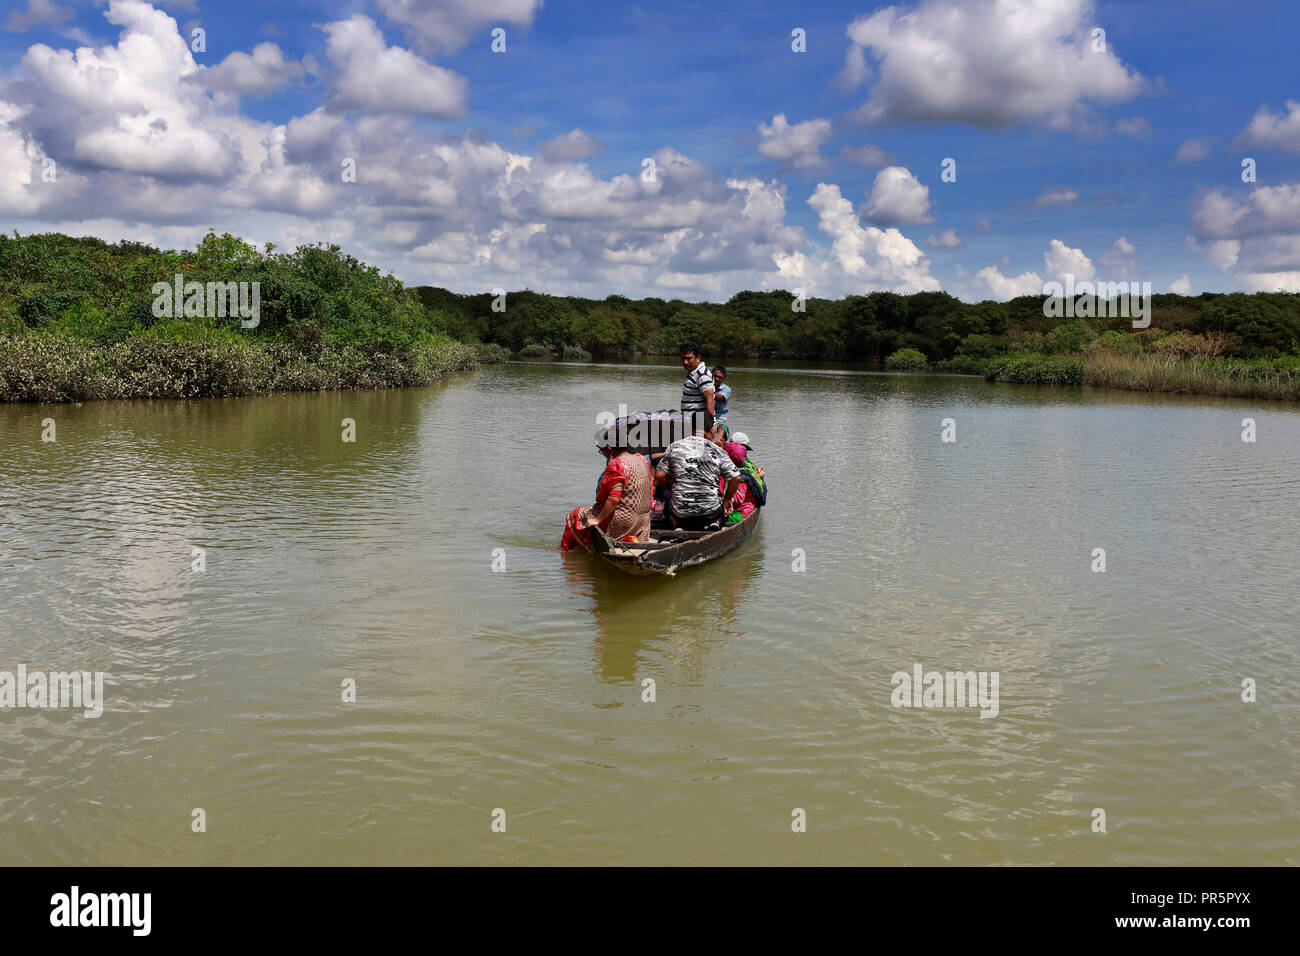 Sylhet, Bangladesh - September 21, 2018: Ratargul is the only freshwater swamp forest in the country and affectionately called the 'Amazon of Banglade Stock Photo